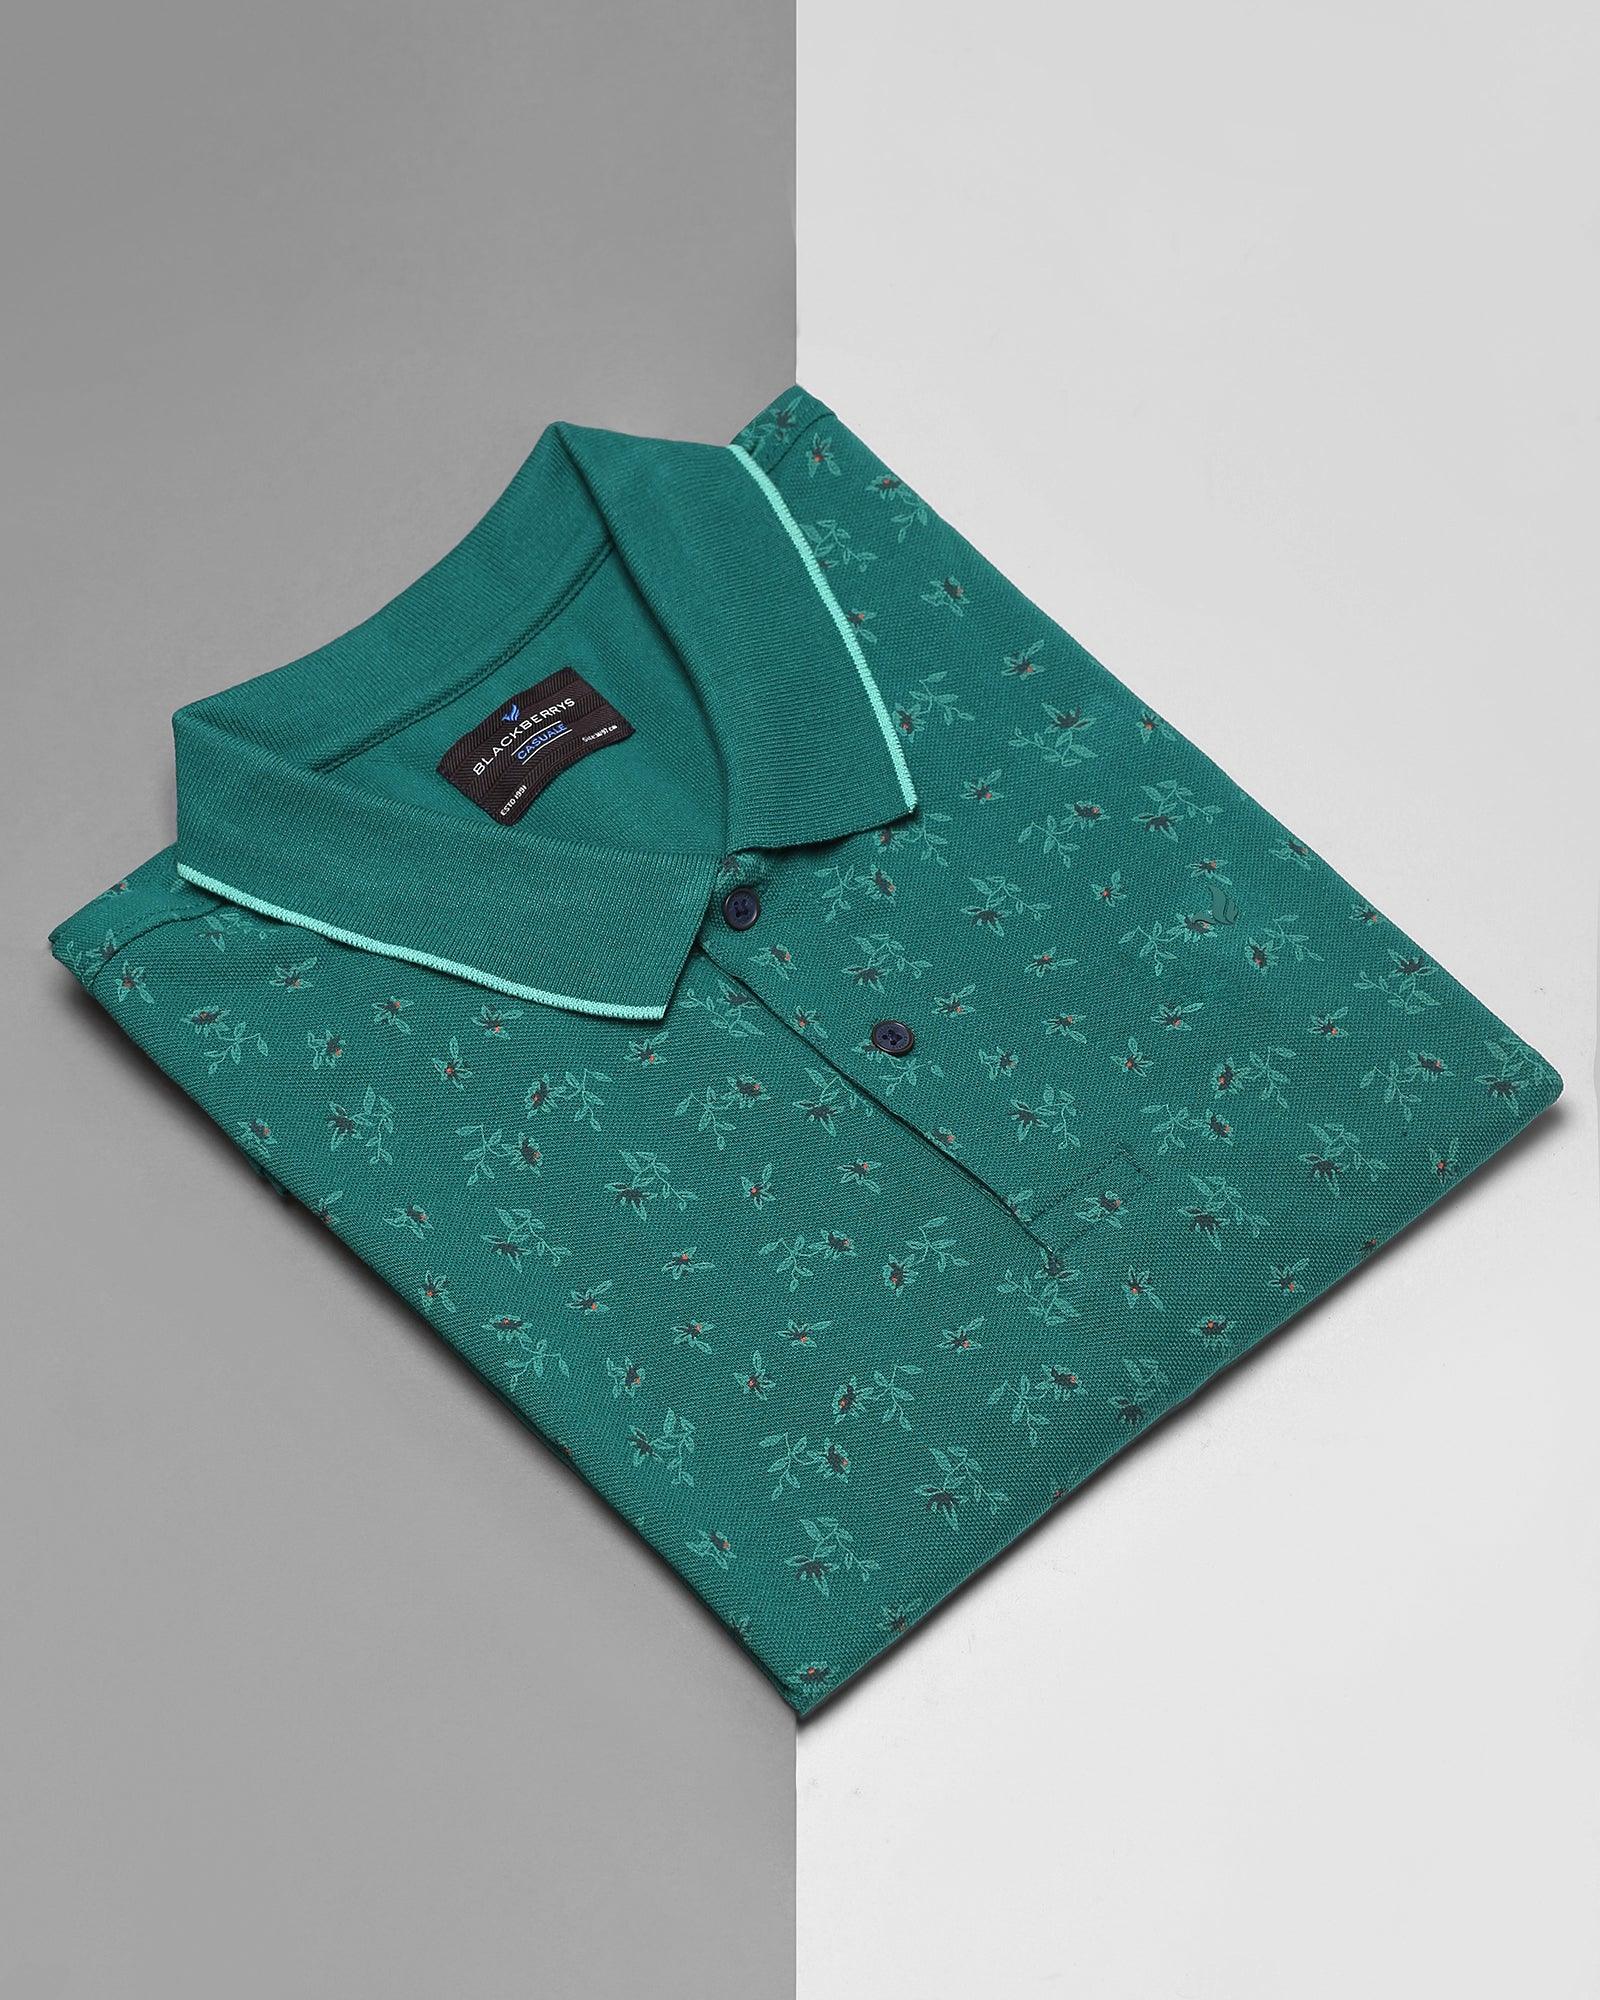 Polo Forest Green Printed T Shirt - Penny